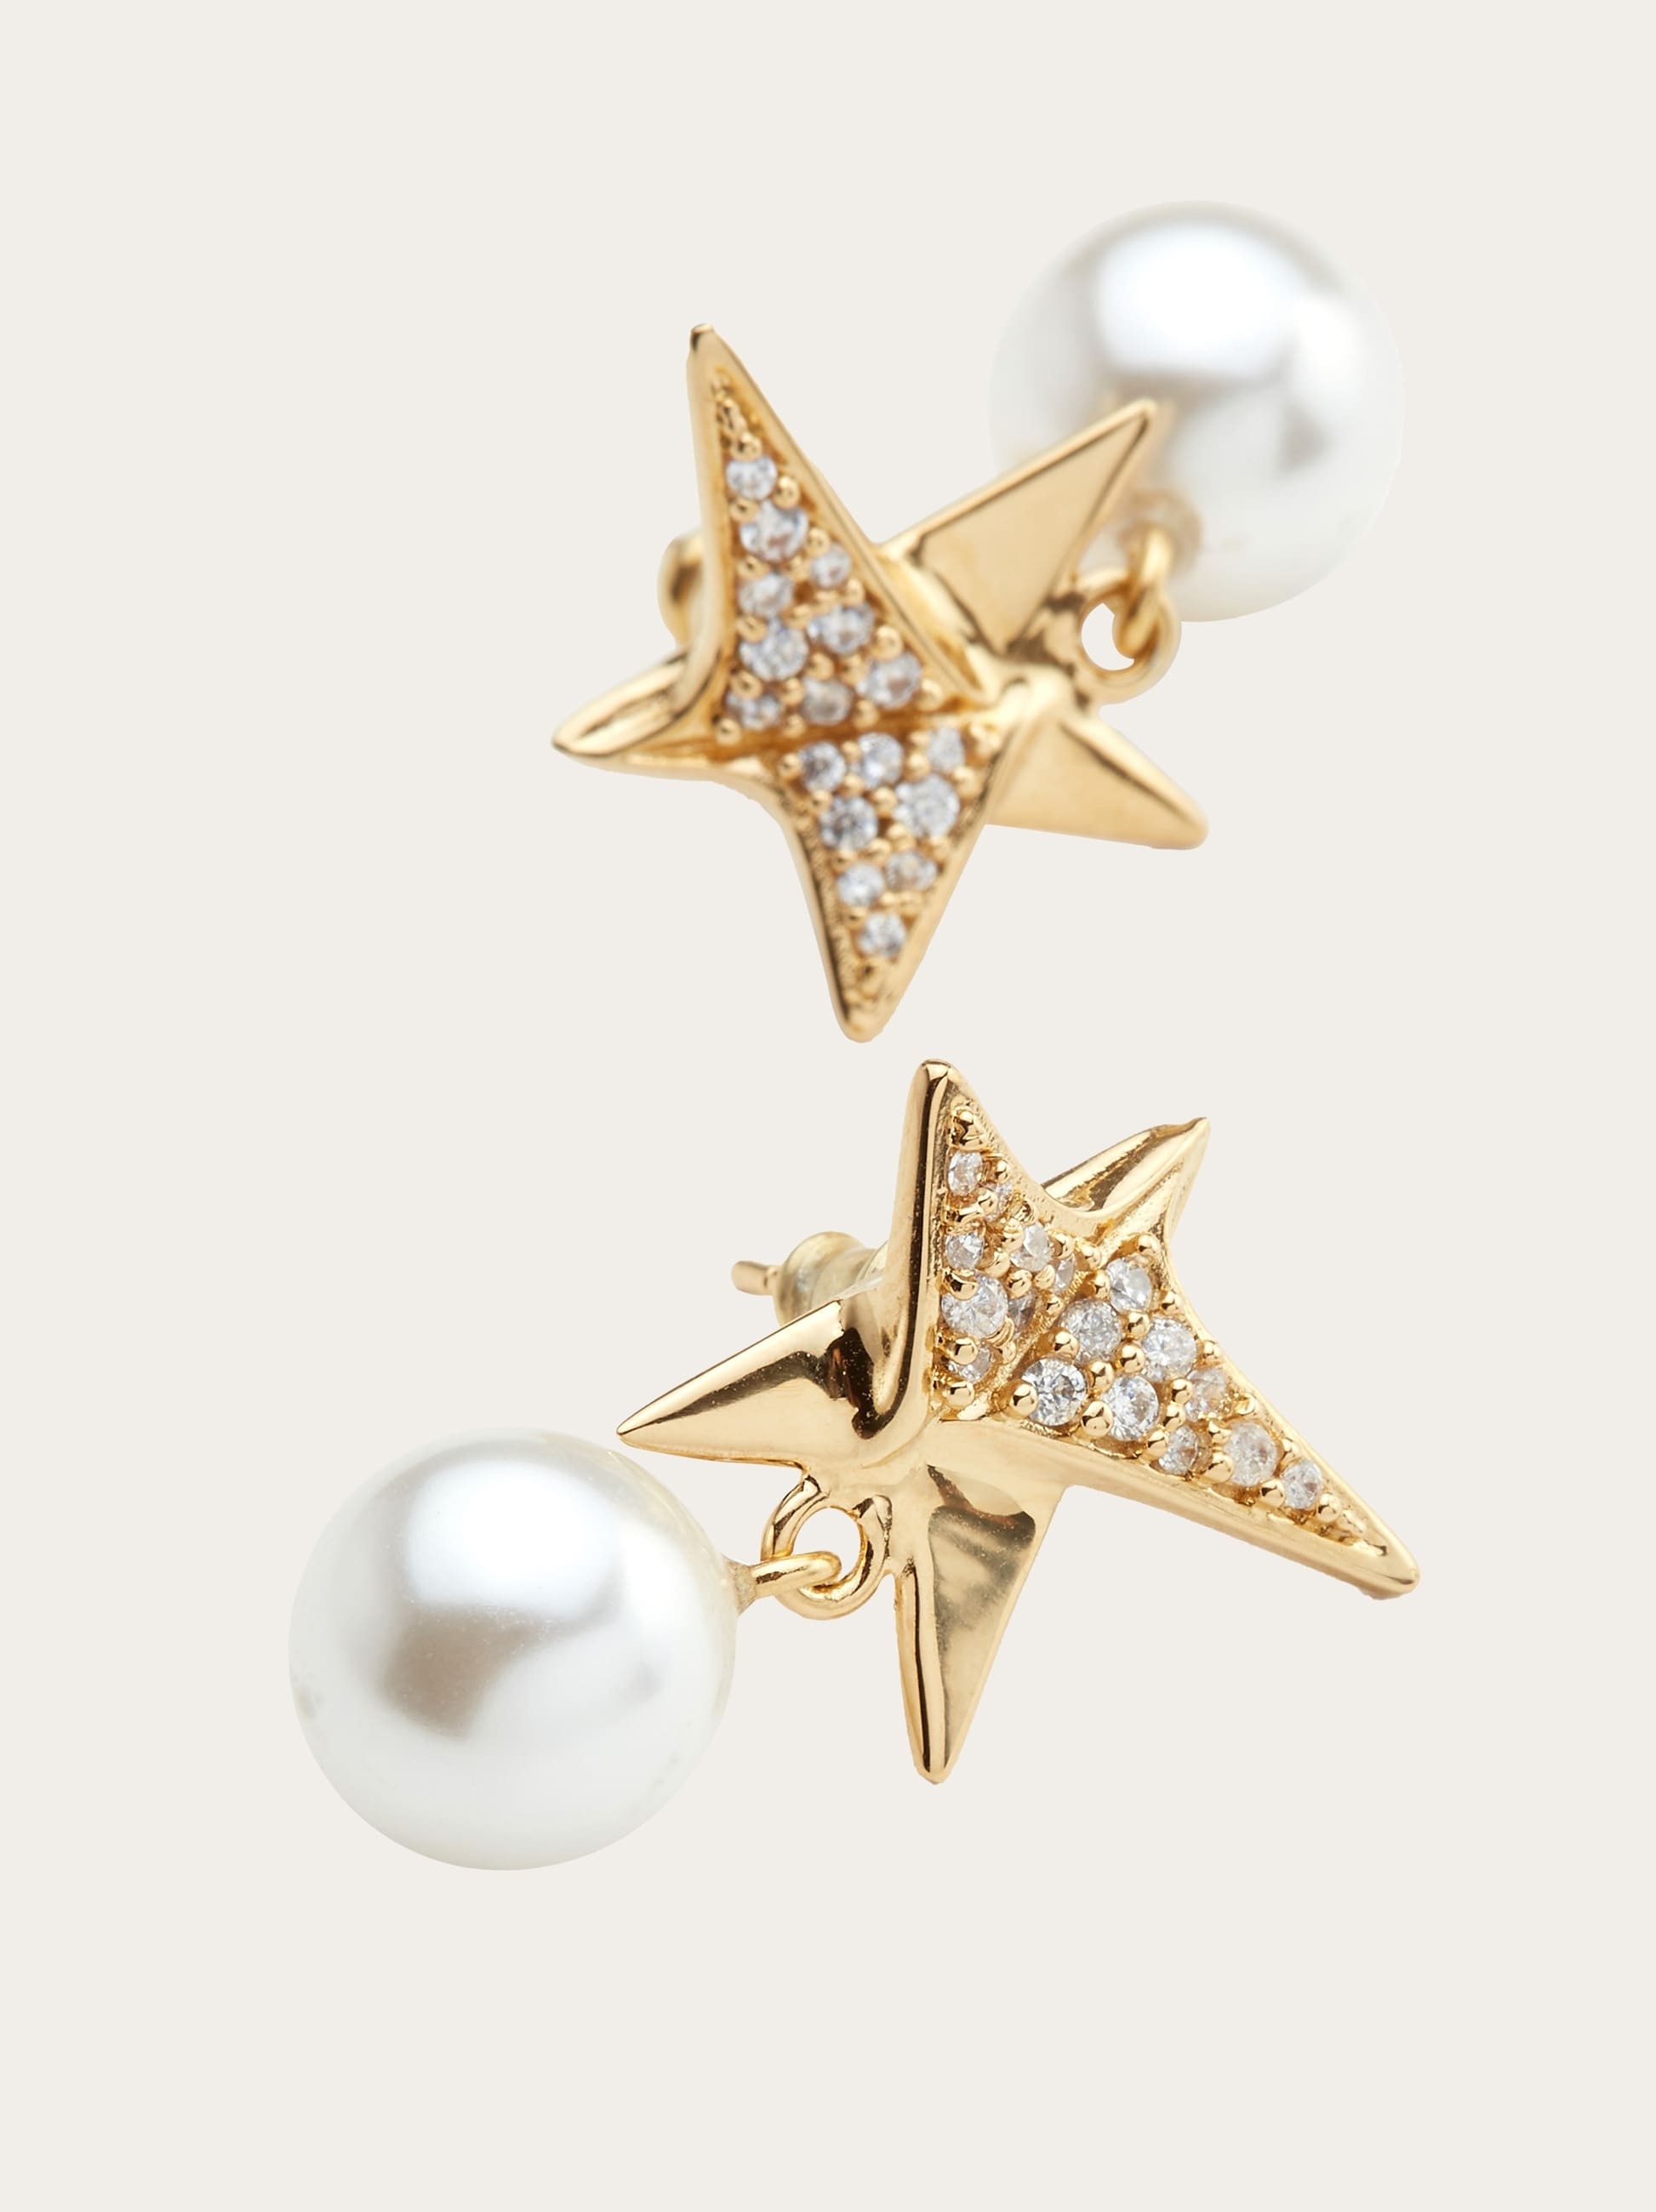 Star earrings with crystals - 5